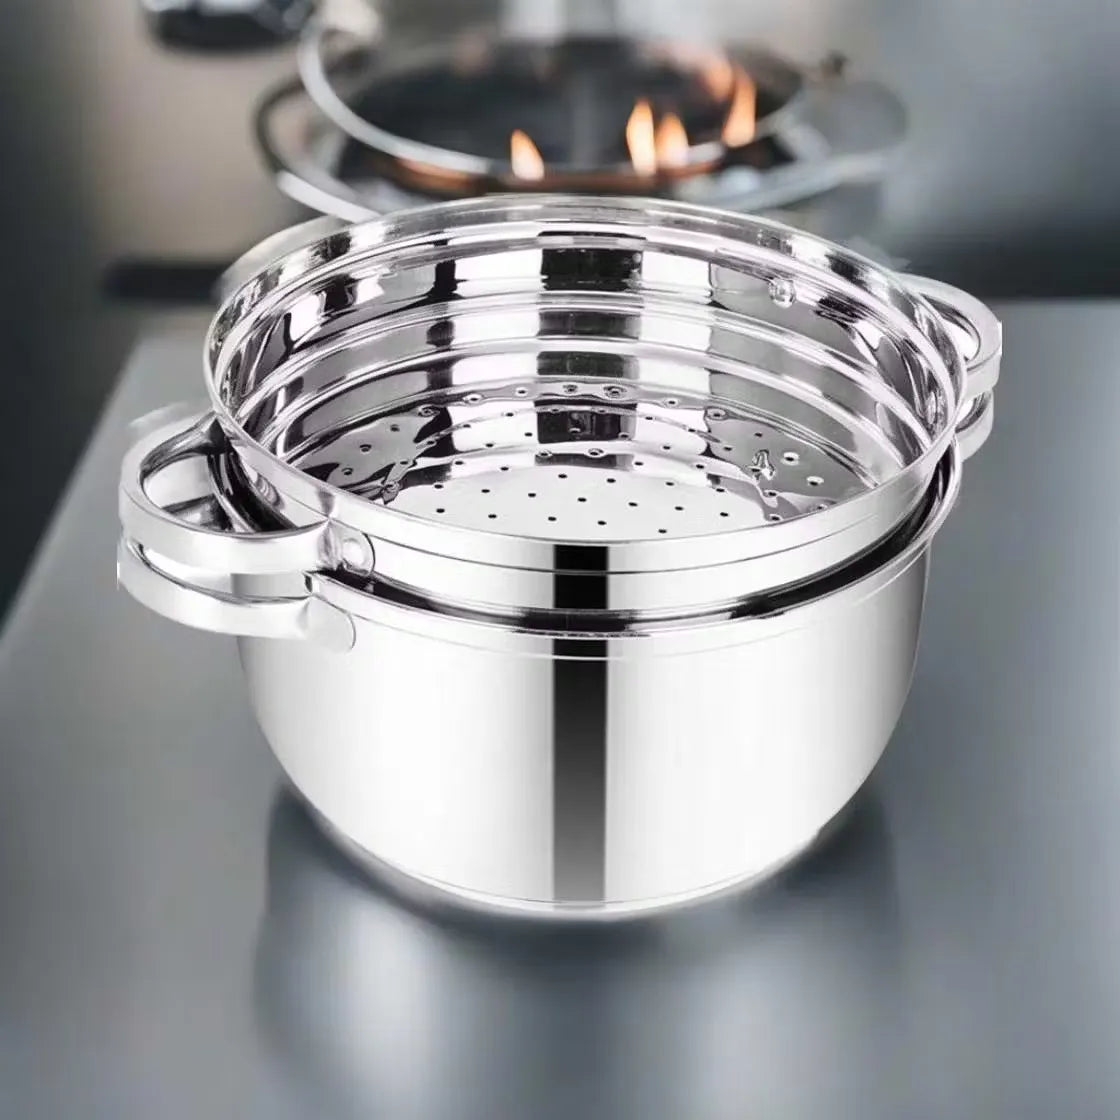 Insiya 8-pc Stainless Steel: Cook & shine in your kitchen.  Sleek & durable Insiya pots/pans. Elevate your cooking.  Shine in the kitchen! 8-piece Insiya cookware set. Shine in your kitchen! Get Insiya 8-pc cookware set. Upgrade your cooking: Shop Insiya cookware now!